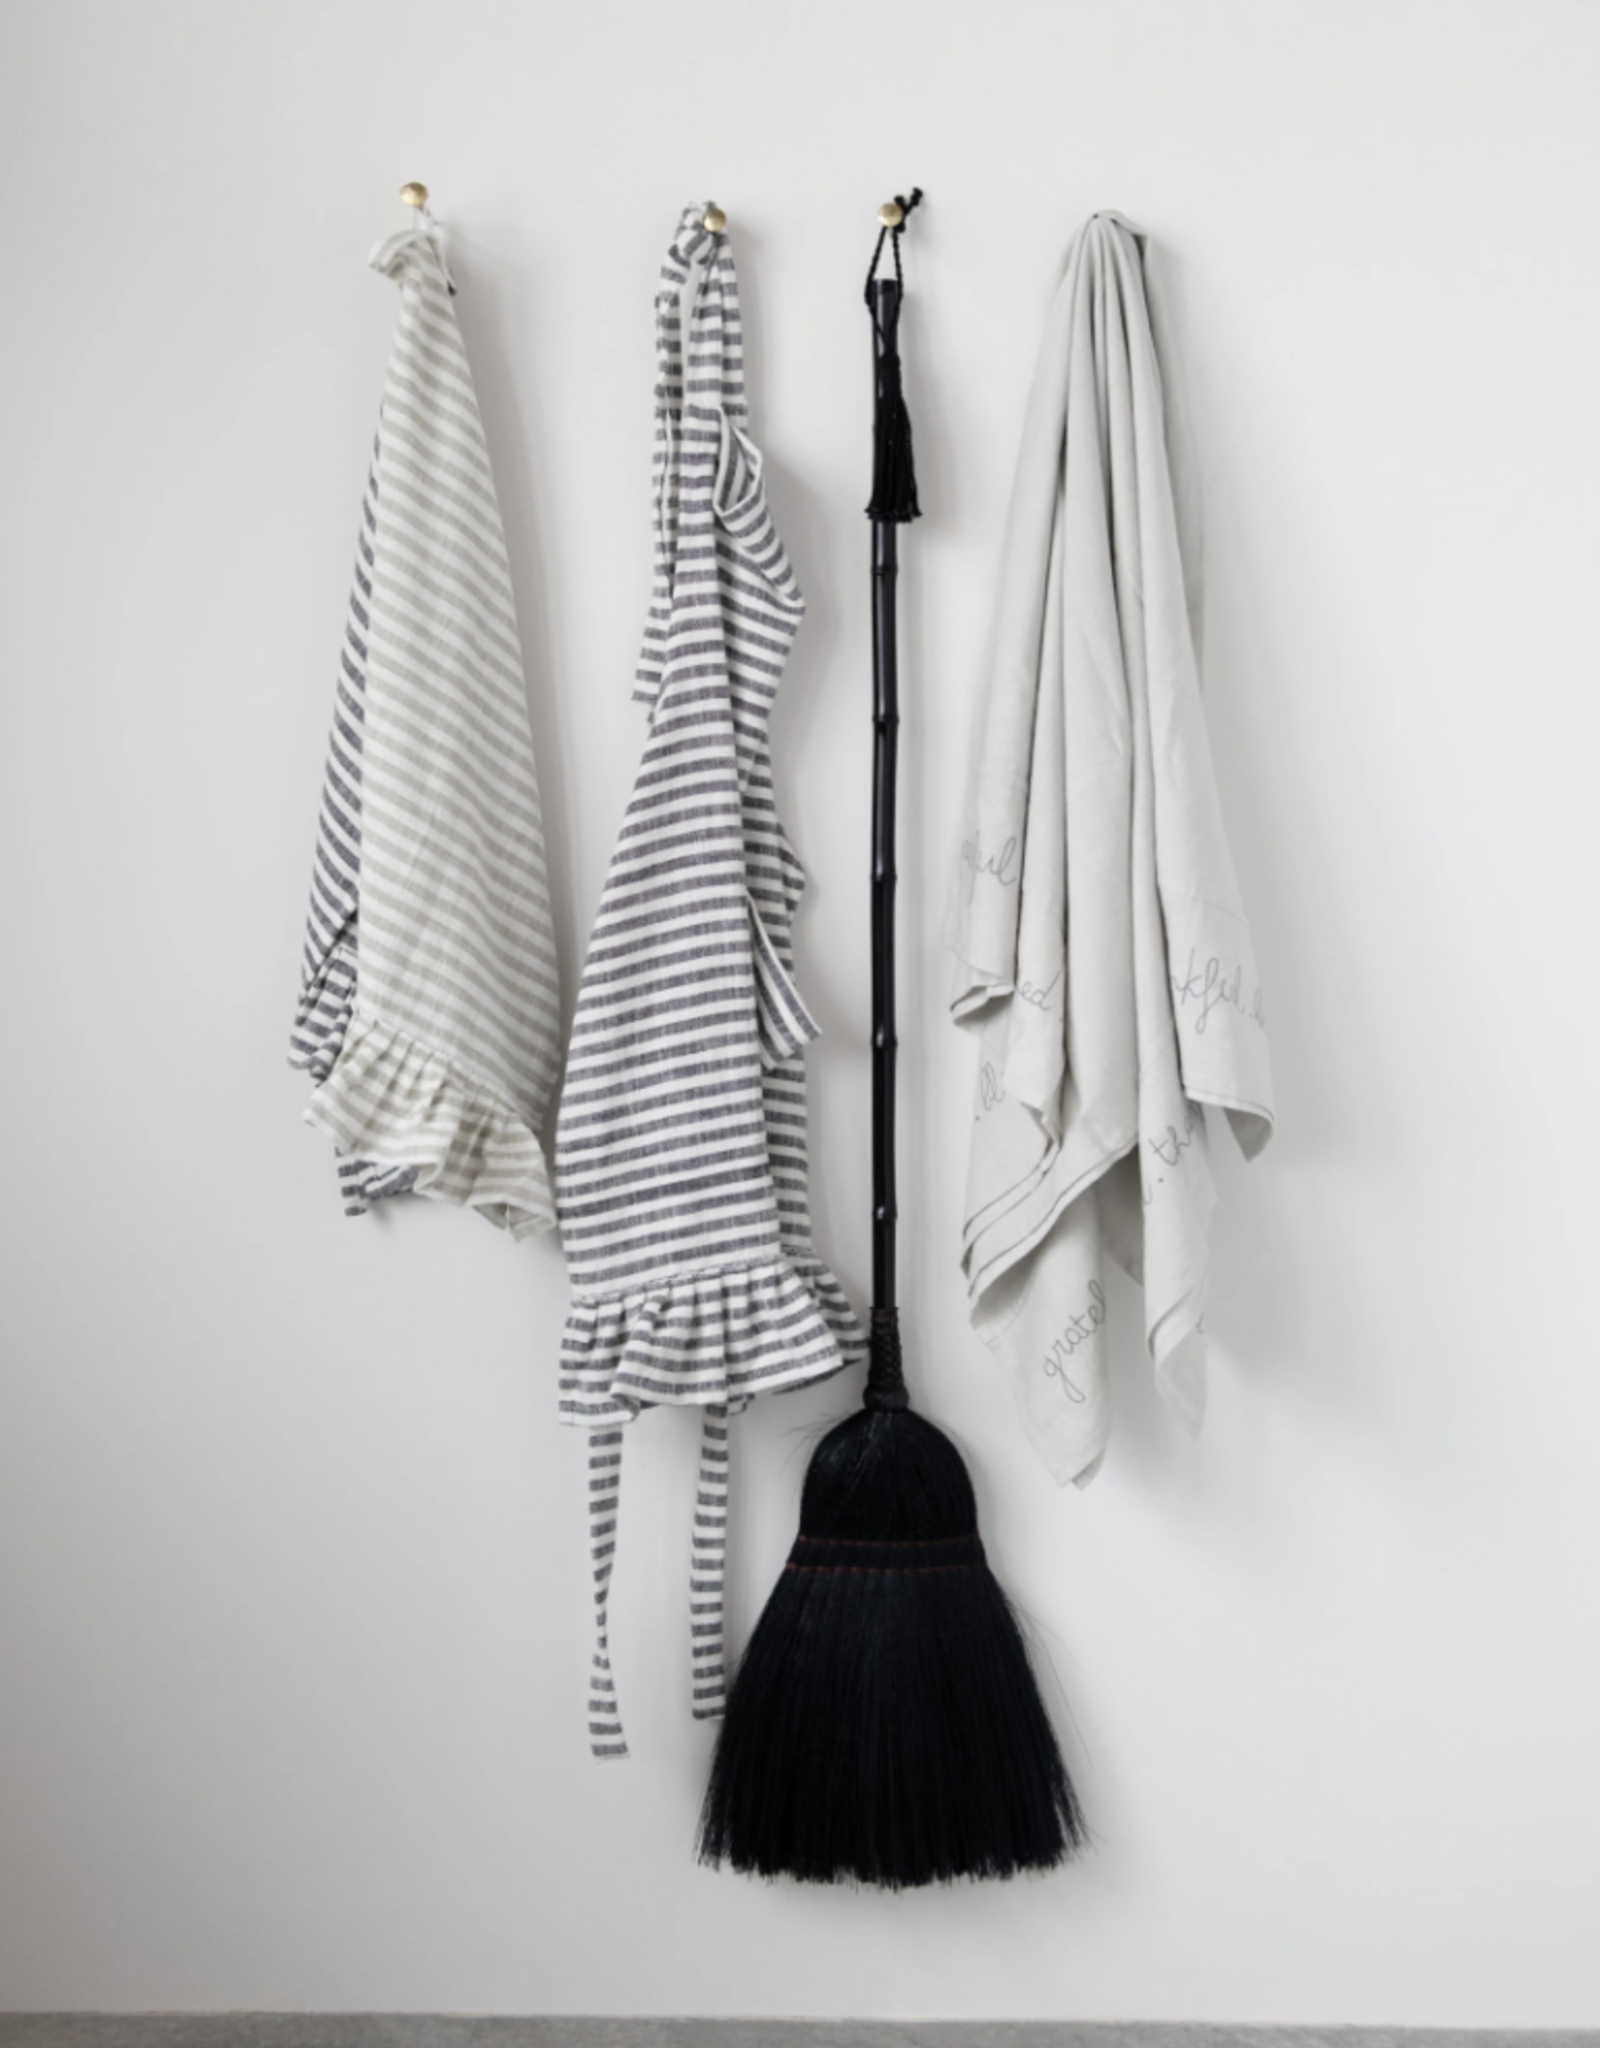 Woven Cotton Striped Apron with Ruffle